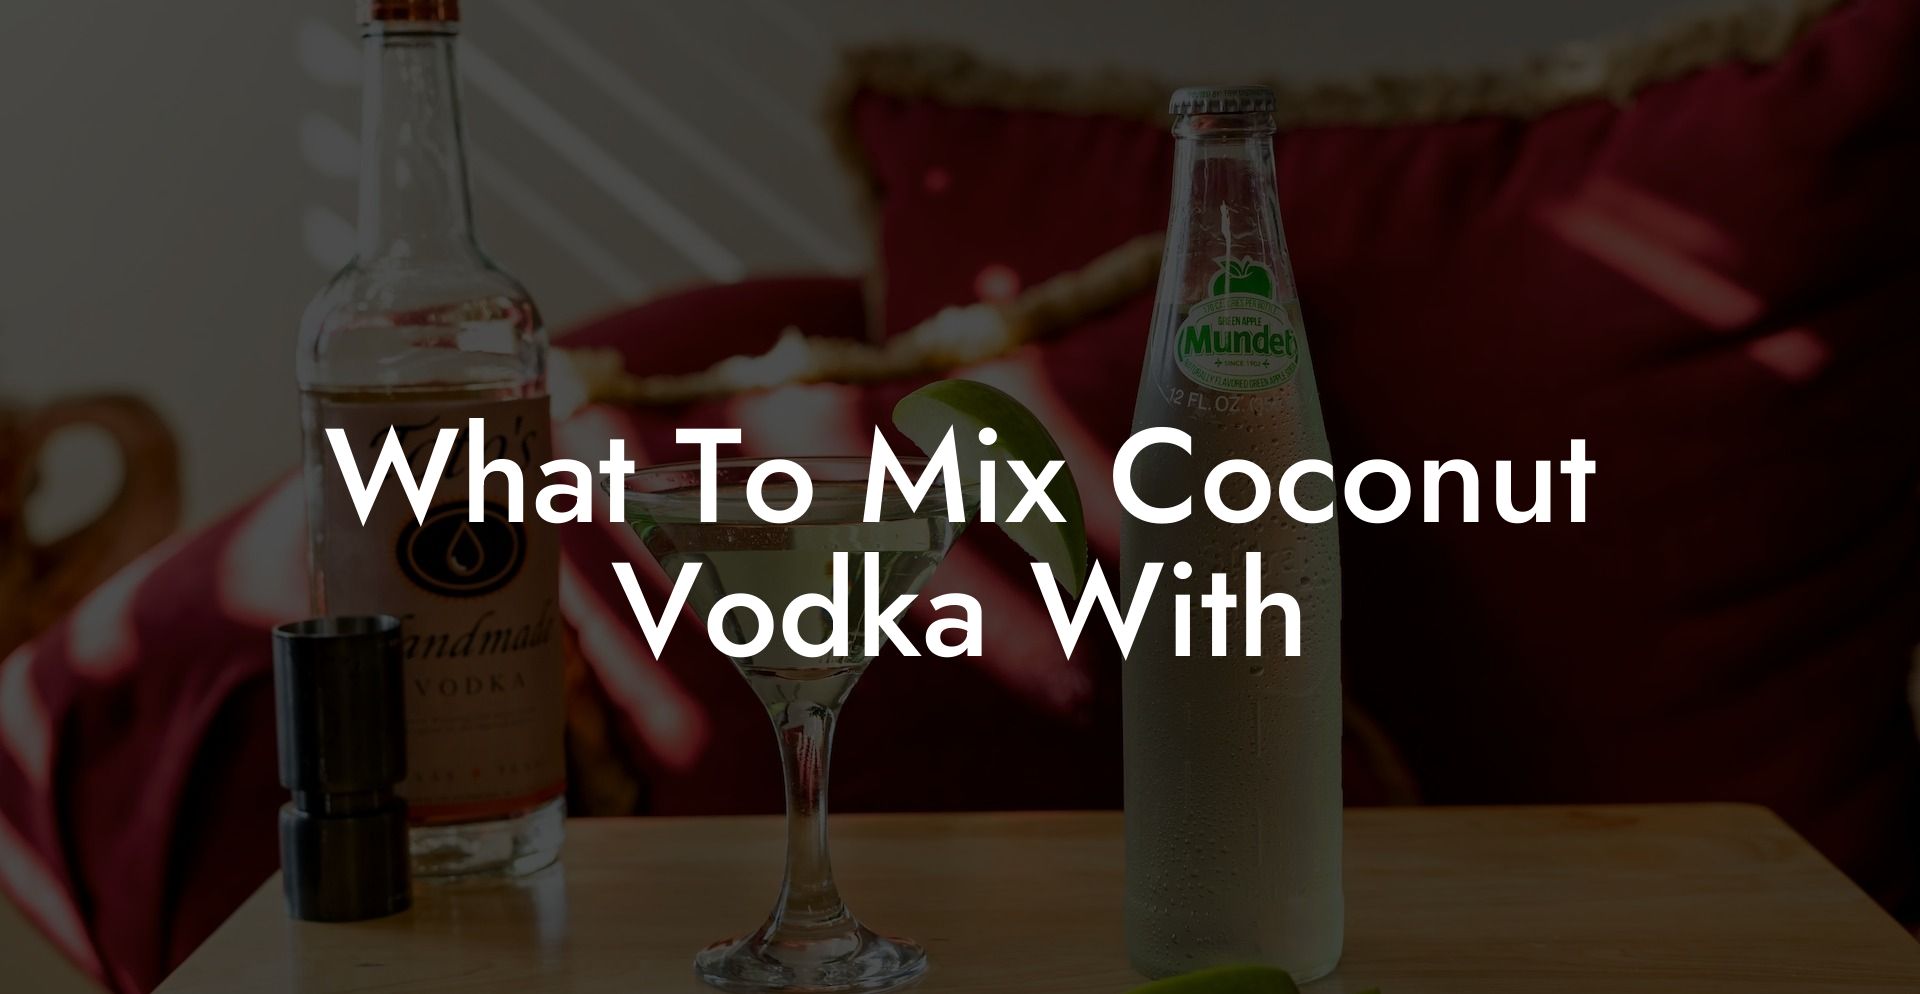 What To Mix Coconut Vodka With